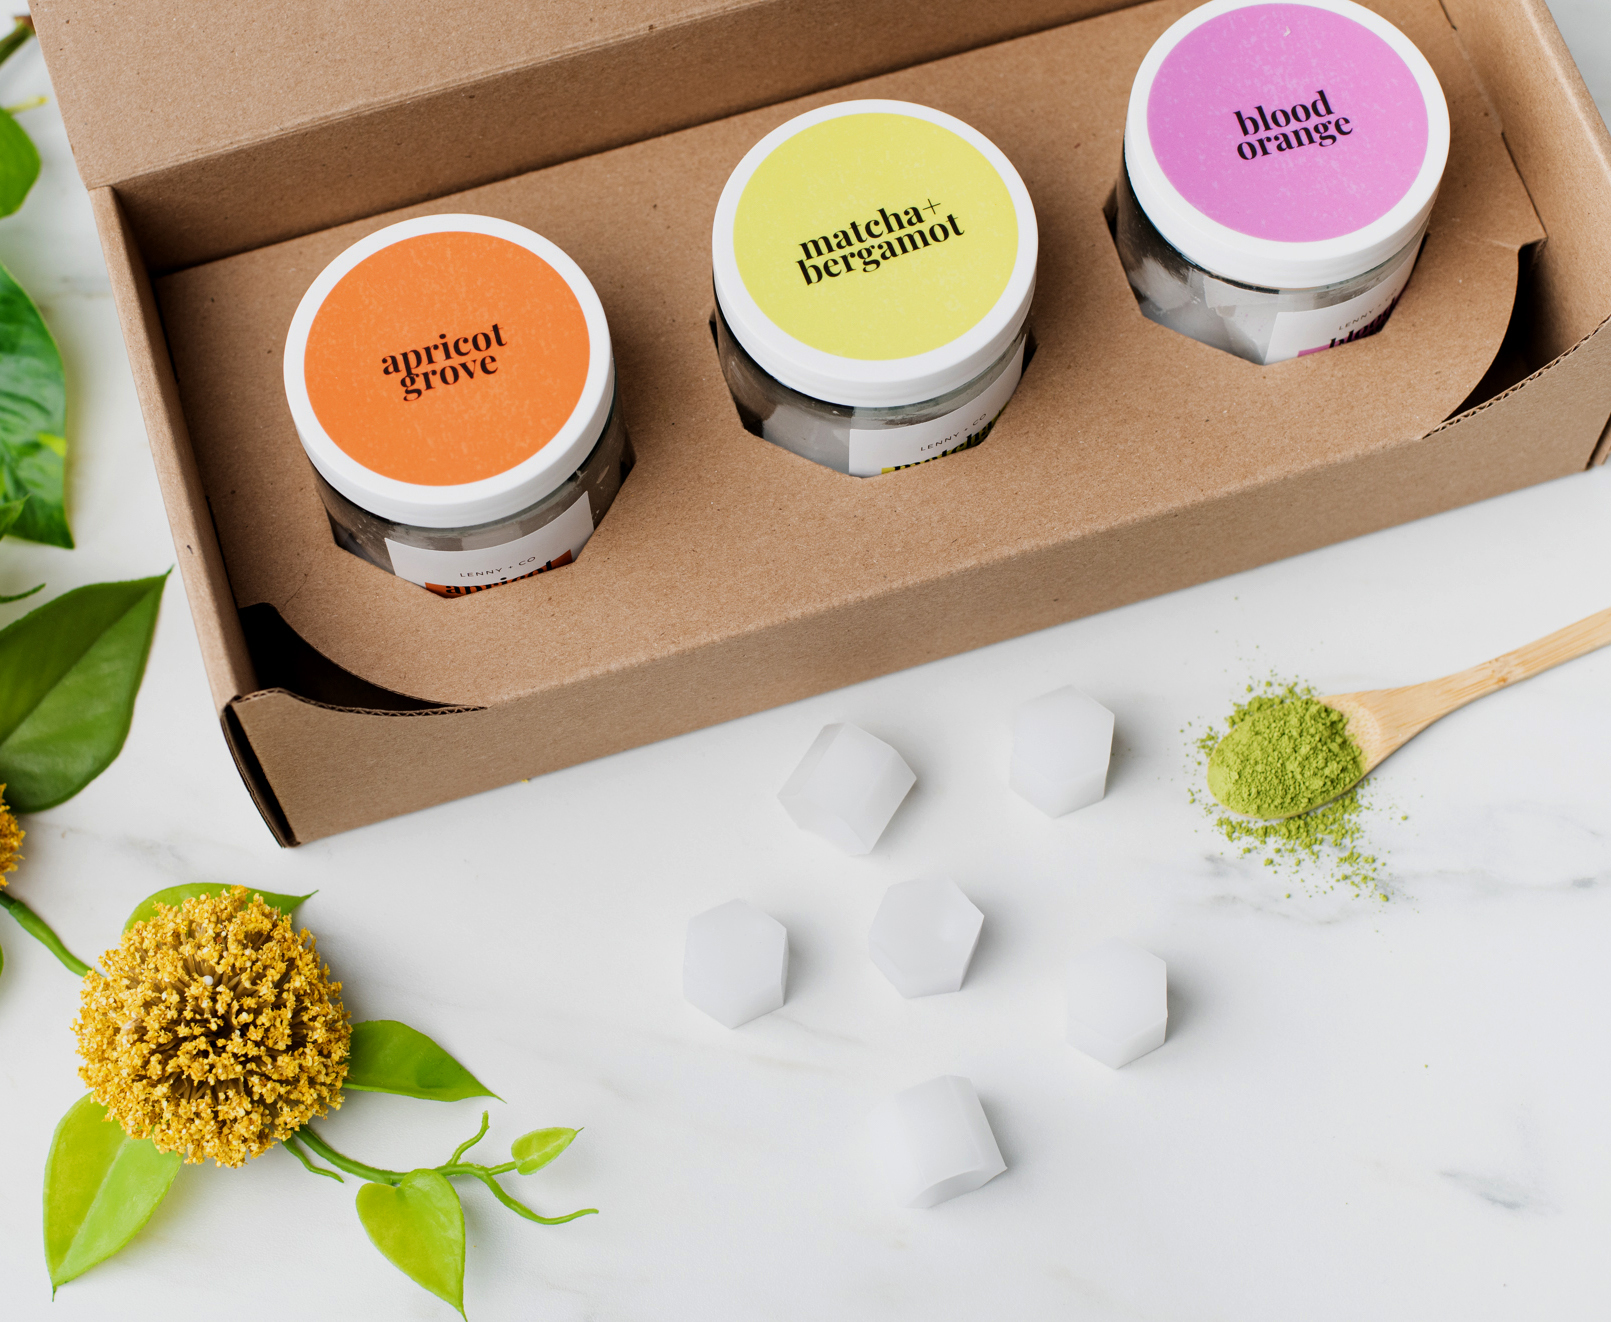 Orange, green, and purple labeled jars in a cardboard box on a white marble surface. Flowers, white wax melt squares, and matcha powder is beside the box. 